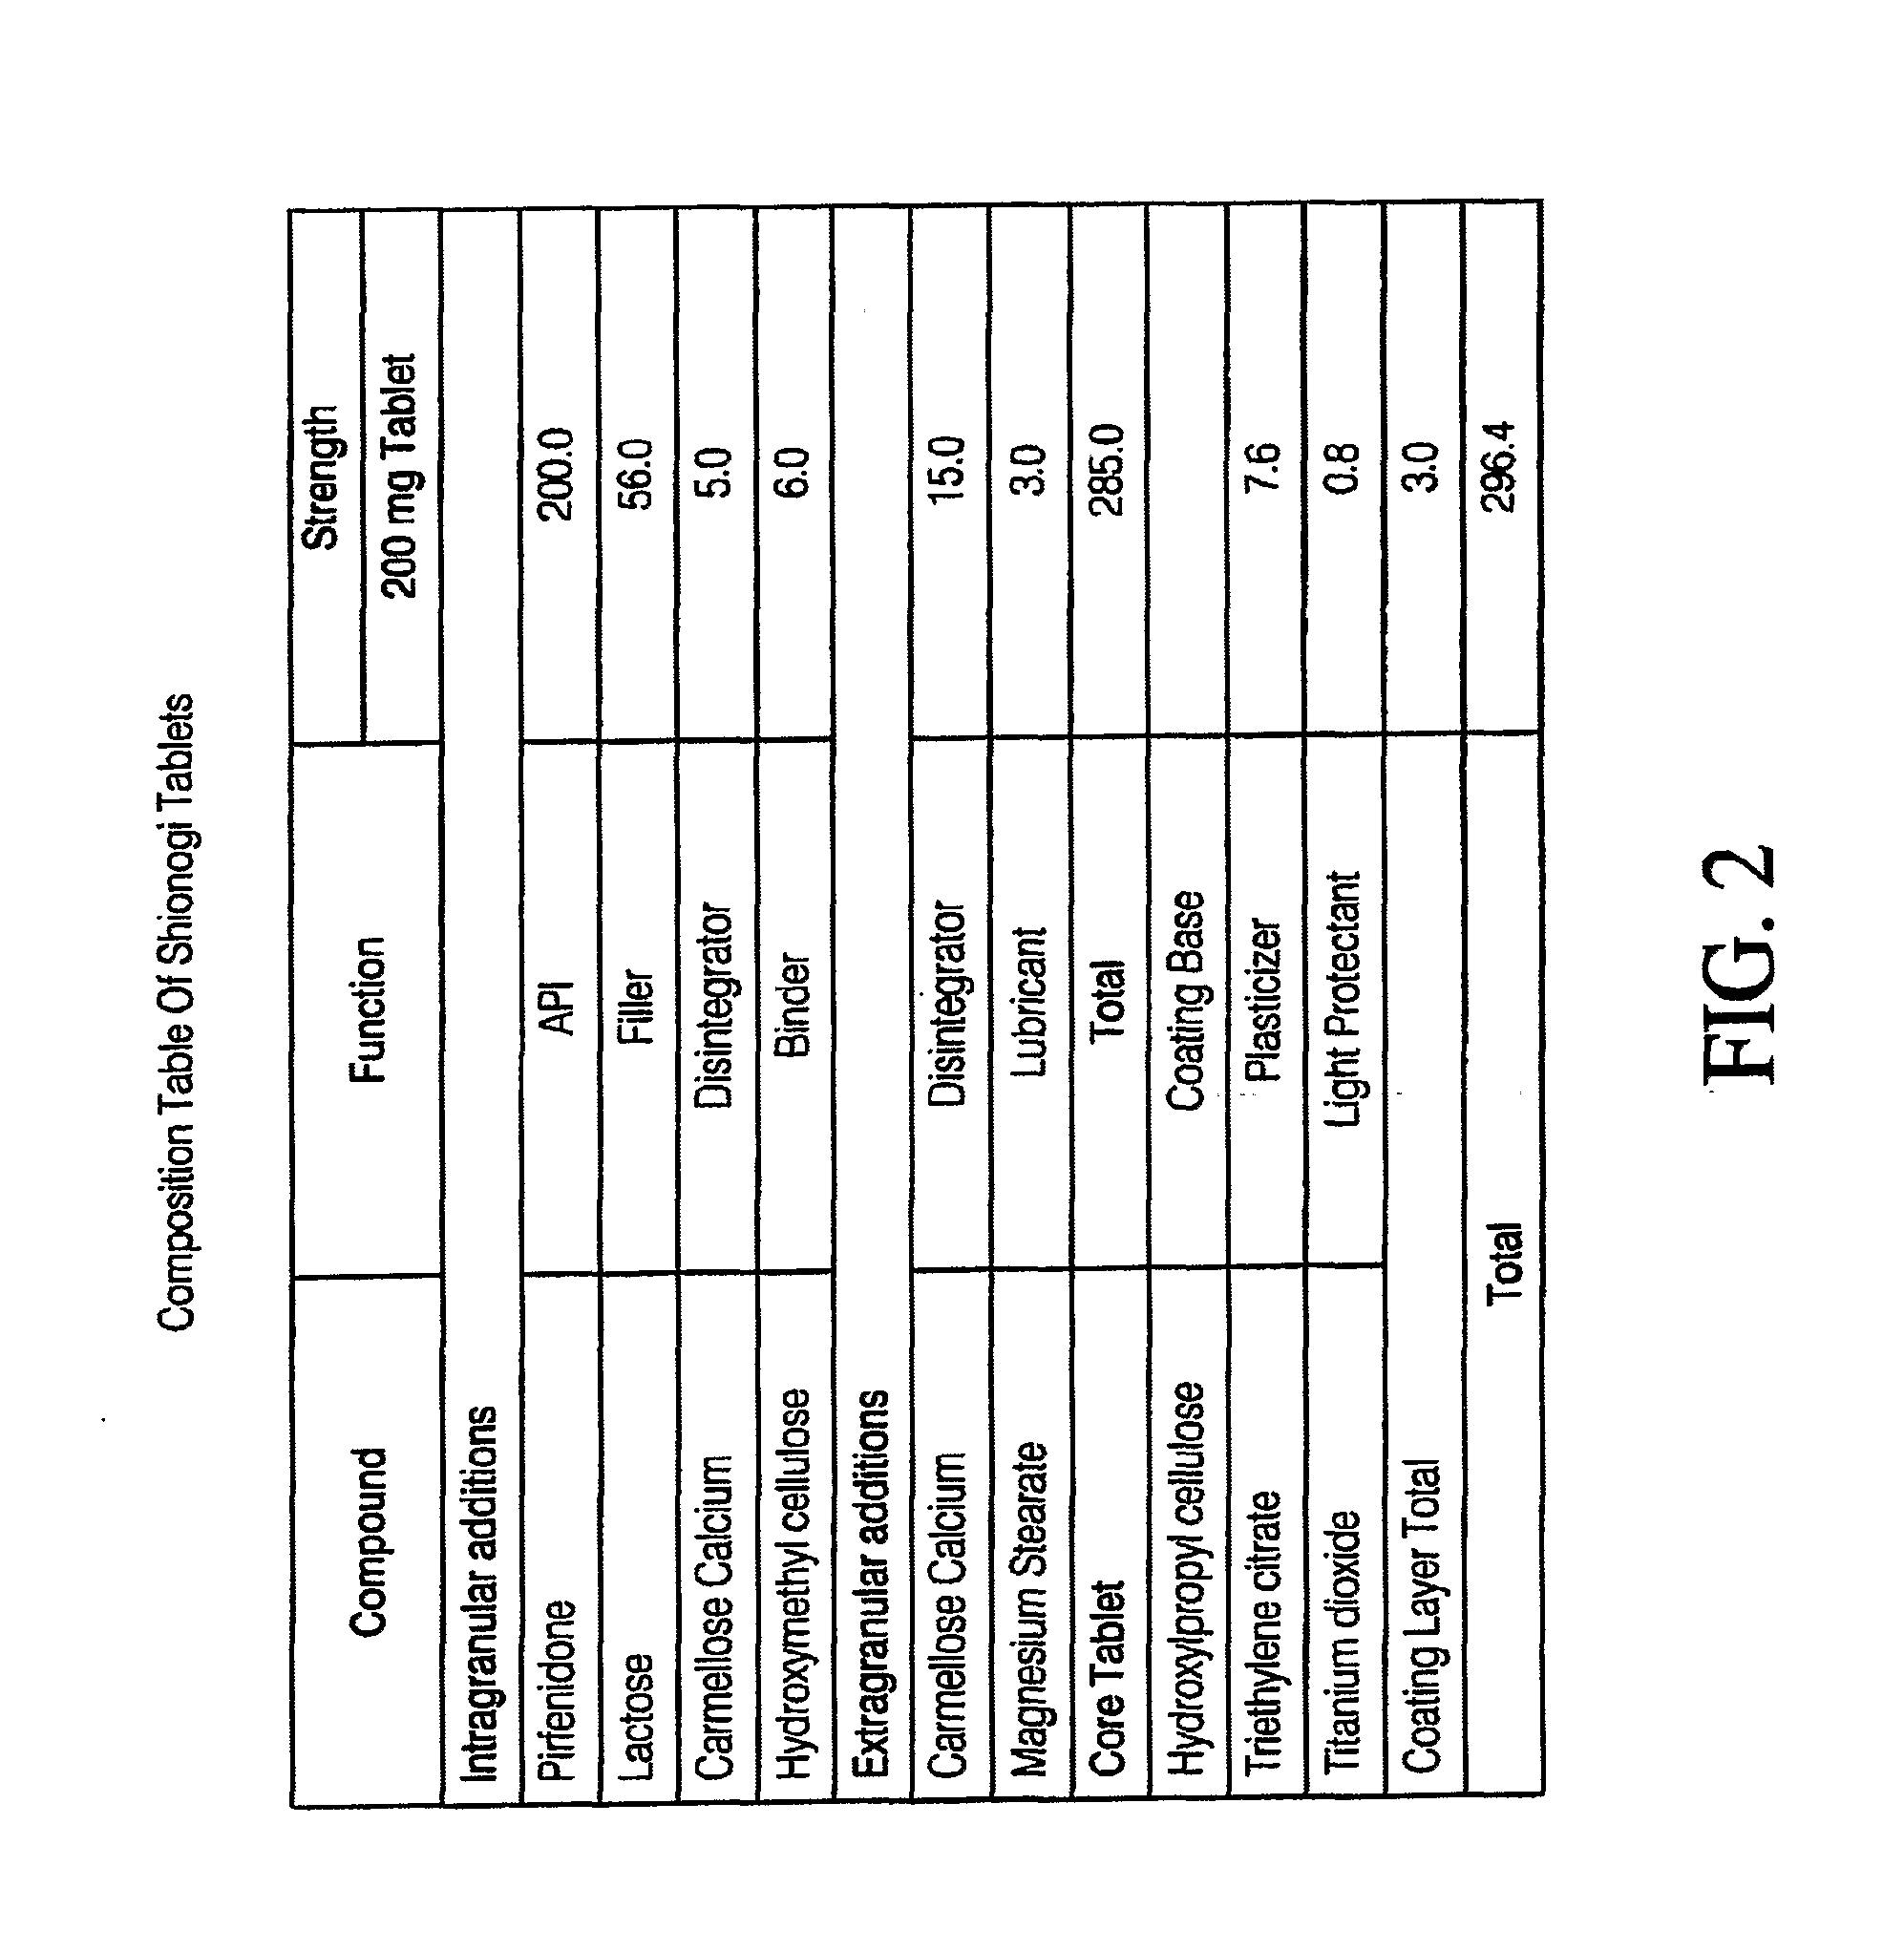 Capsule formulation of pirfenidone and pharmaceutically acceptable excipients